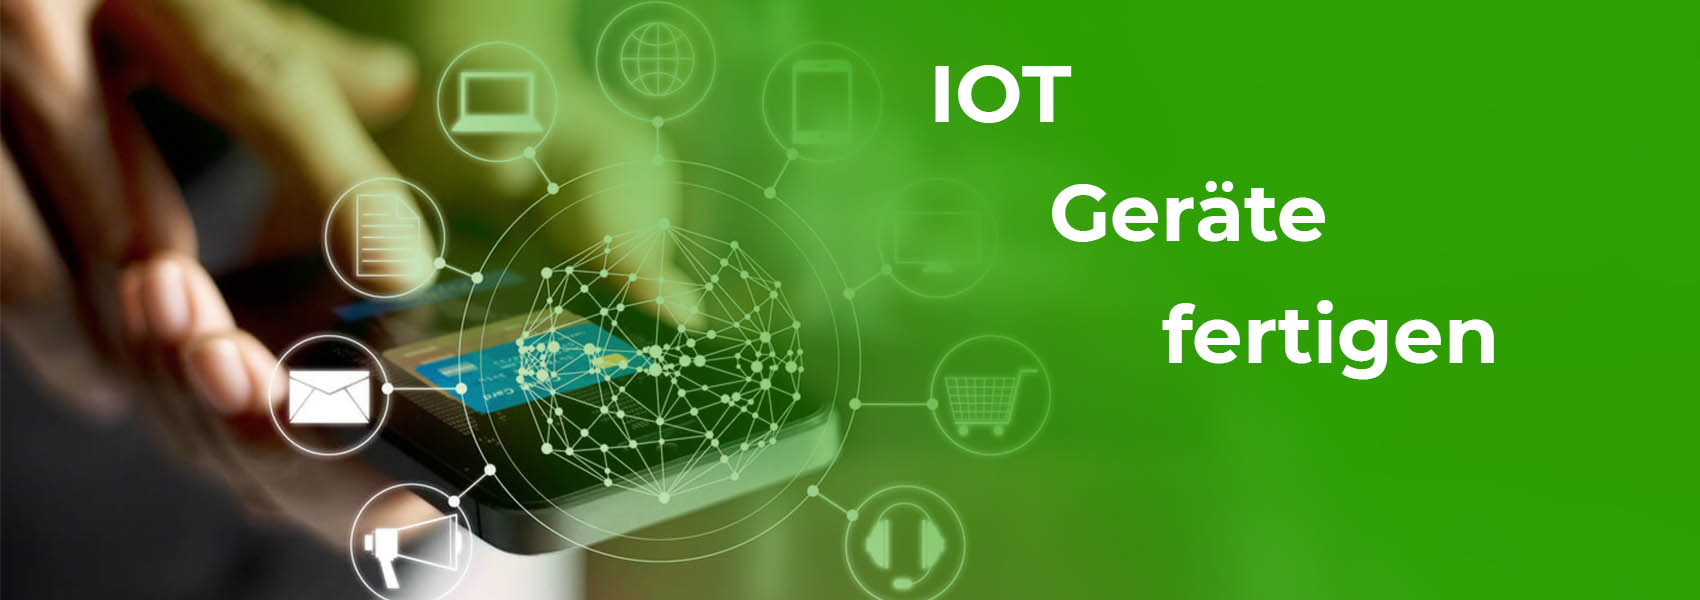 Manufacturing IOT Devices Blog Banner - German